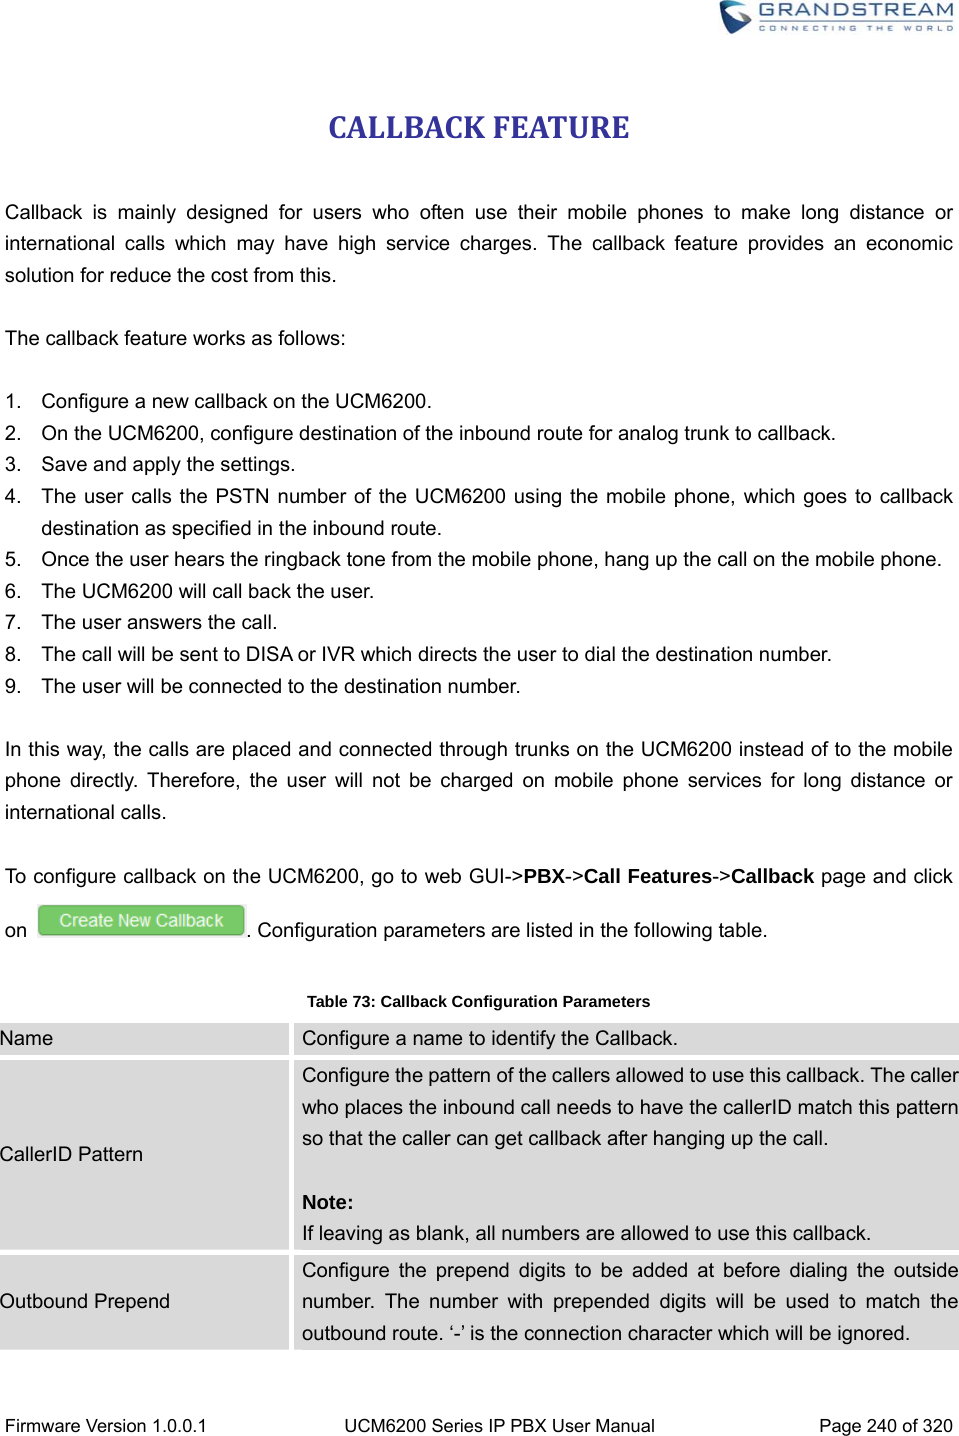  Firmware Version 1.0.0.1  UCM6200 Series IP PBX User Manual  Page 240 of 320 CALLBACKFEATURE Callback is mainly designed for users who often use their mobile phones to make long distance or international calls which may have high service charges. The callback feature provides an economic solution for reduce the cost from this.  The callback feature works as follows:  1.  Configure a new callback on the UCM6200. 2.  On the UCM6200, configure destination of the inbound route for analog trunk to callback. 3.  Save and apply the settings. 4.  The user calls the PSTN number of the UCM6200 using the mobile phone, which goes to callback destination as specified in the inbound route. 5.  Once the user hears the ringback tone from the mobile phone, hang up the call on the mobile phone. 6.  The UCM6200 will call back the user. 7.  The user answers the call. 8.  The call will be sent to DISA or IVR which directs the user to dial the destination number. 9.  The user will be connected to the destination number.  In this way, the calls are placed and connected through trunks on the UCM6200 instead of to the mobile phone directly. Therefore, the user will not be charged on mobile phone services for long distance or international calls.  To configure callback on the UCM6200, go to web GUI-&gt;PBX-&gt;Call Features-&gt;Callback page and click on  . Configuration parameters are listed in the following table.  Table 73: Callback Configuration Parameters Name  Configure a name to identify the Callback. CallerID Pattern Configure the pattern of the callers allowed to use this callback. The caller who places the inbound call needs to have the callerID match this pattern so that the caller can get callback after hanging up the call.  Note: If leaving as blank, all numbers are allowed to use this callback. Outbound Prepend Configure the prepend digits to be added at before dialing the outside number. The number with prepended digits will be used to match the outbound route. ‘-’ is the connection character which will be ignored. 